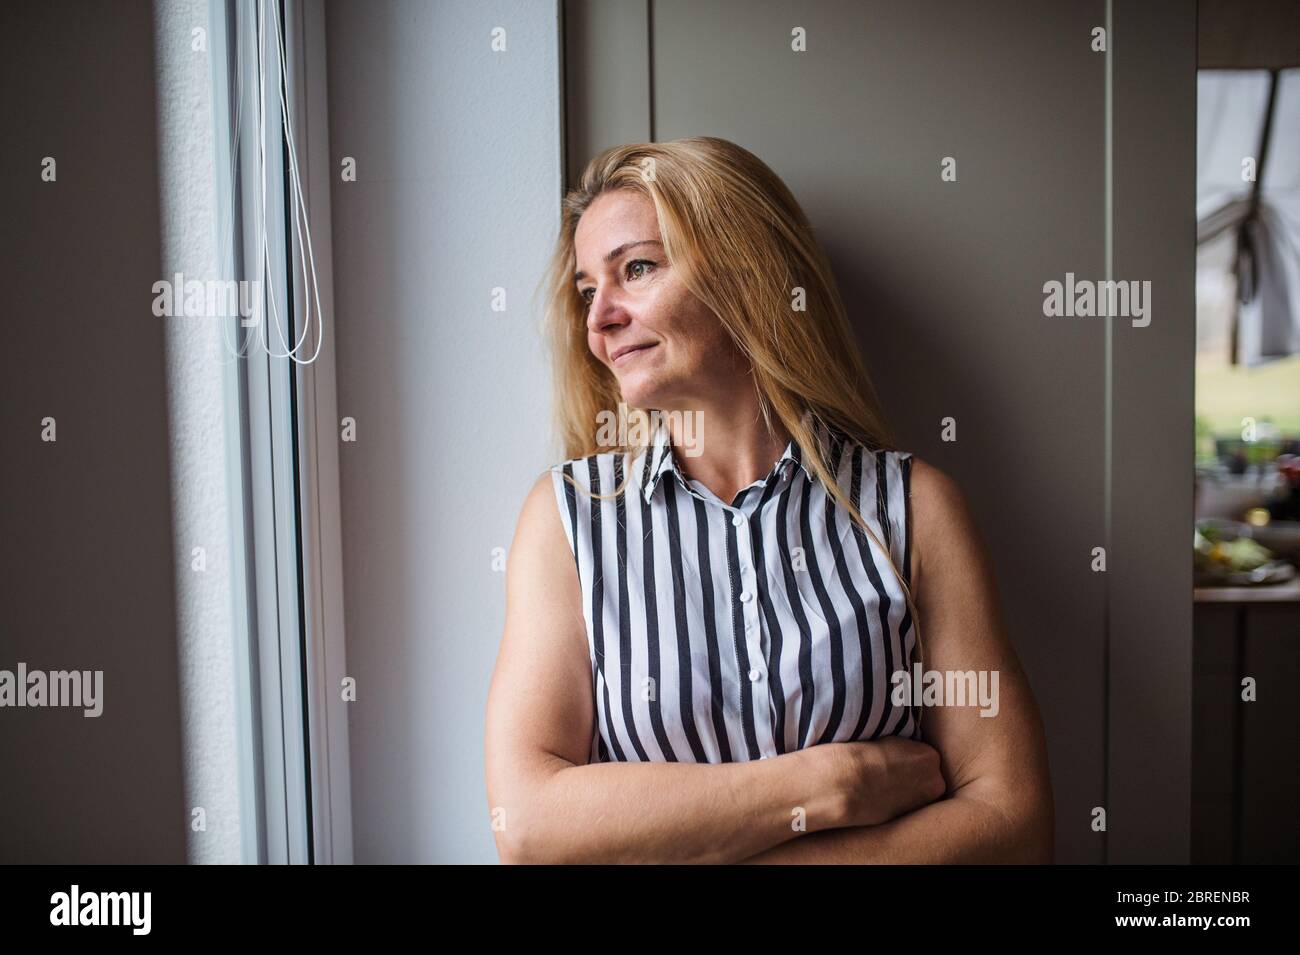 Front view portrait of woman standing indoors at home, resting. Stock Photo